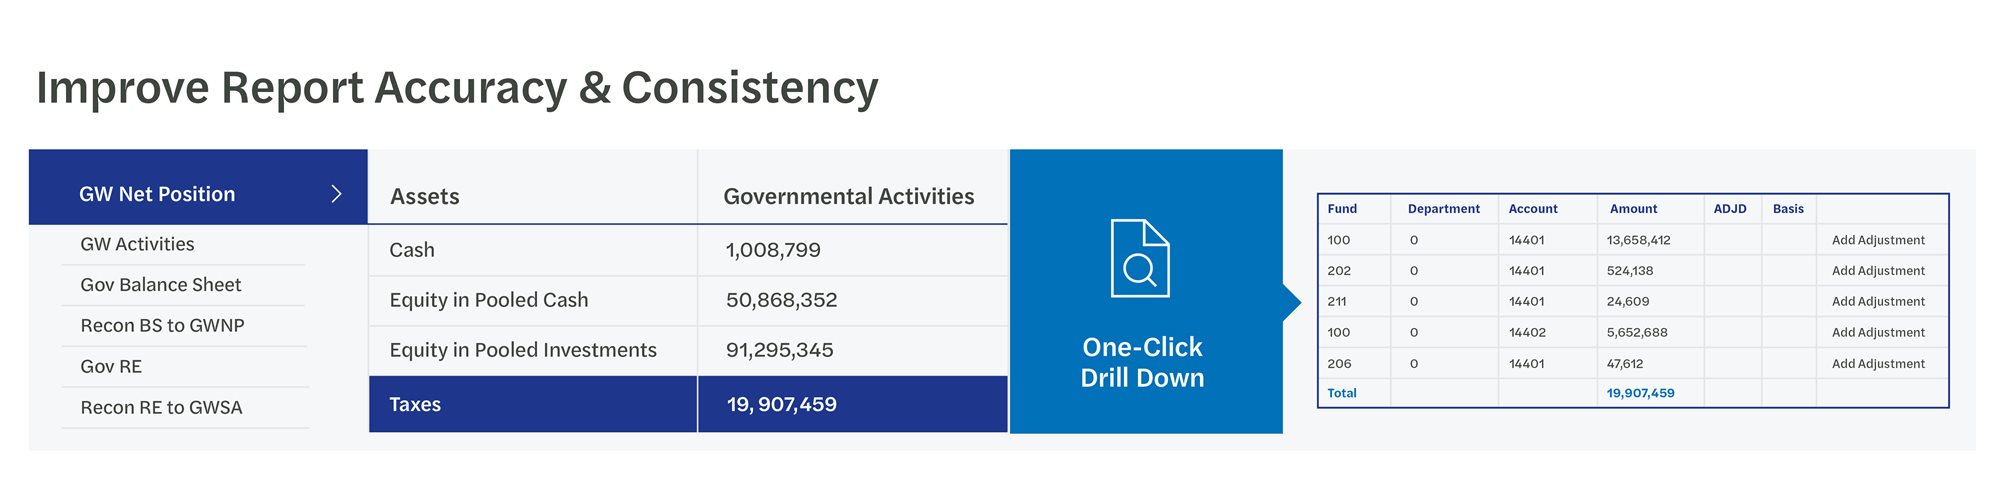 Infographic illustrating one-click drill down capability of The Reporting Solution Software